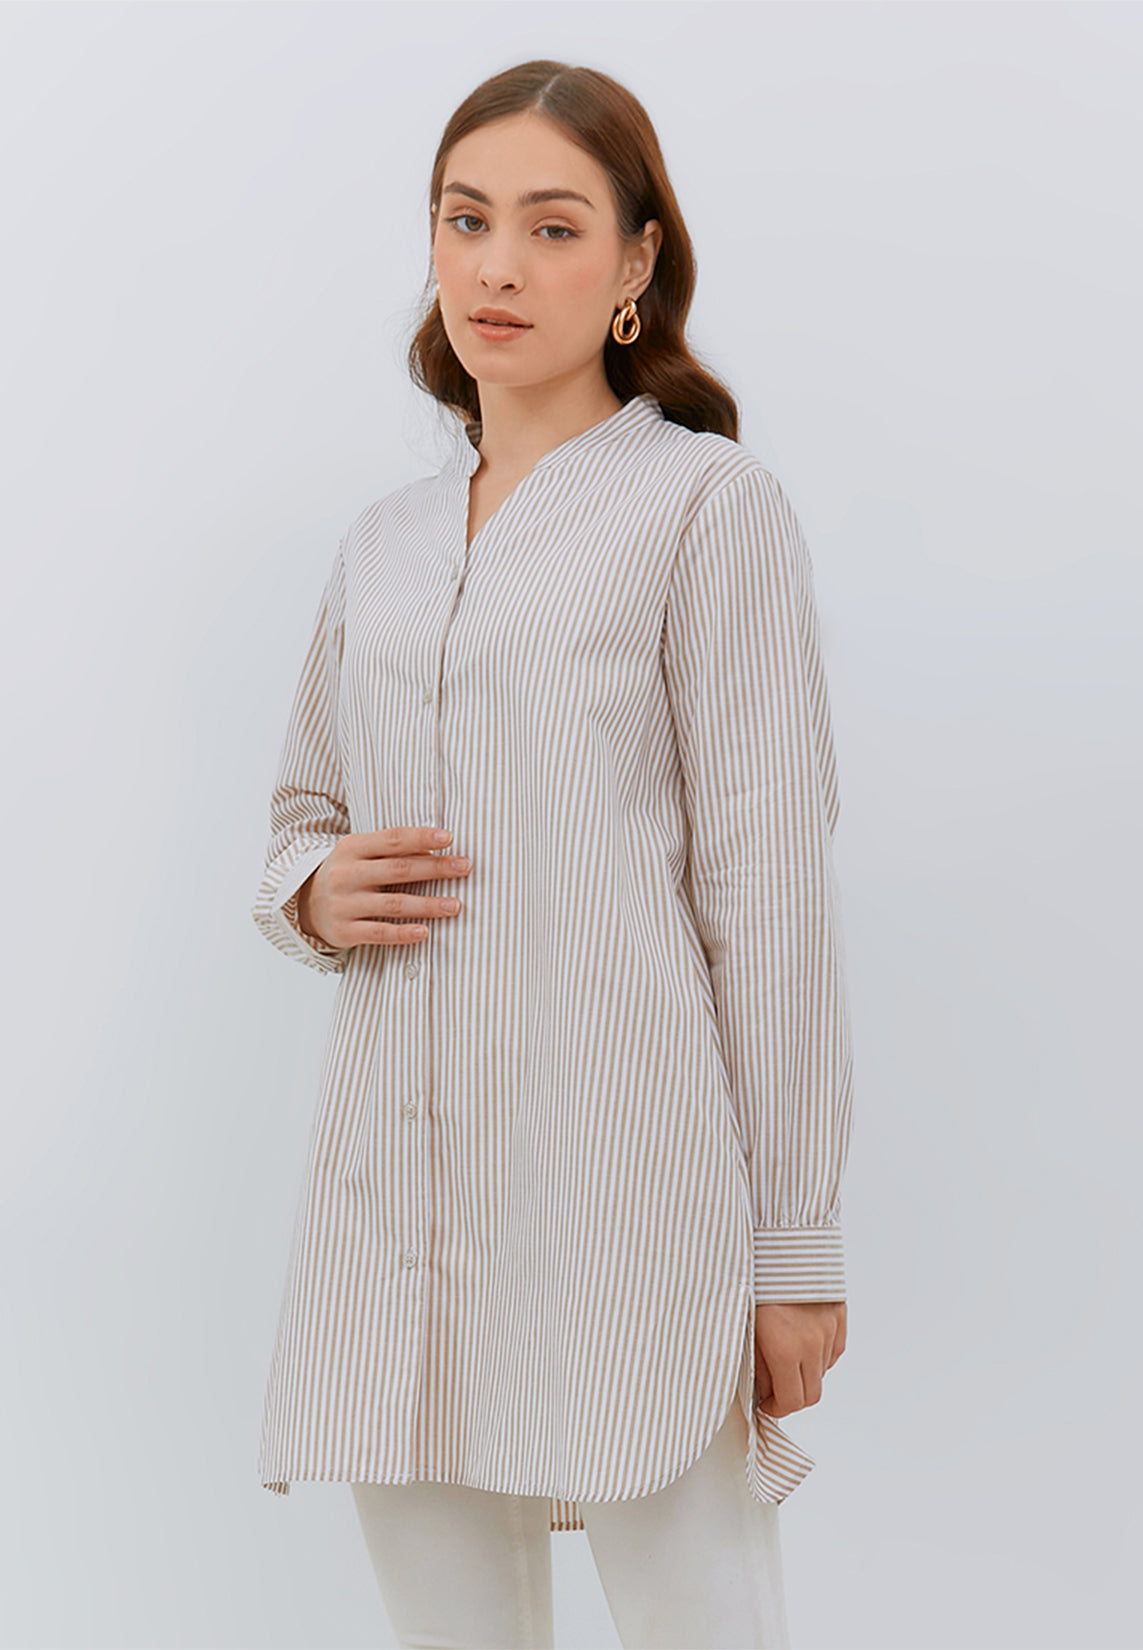 Osella Ladies Stripe Tunic Shirt In Beige And White